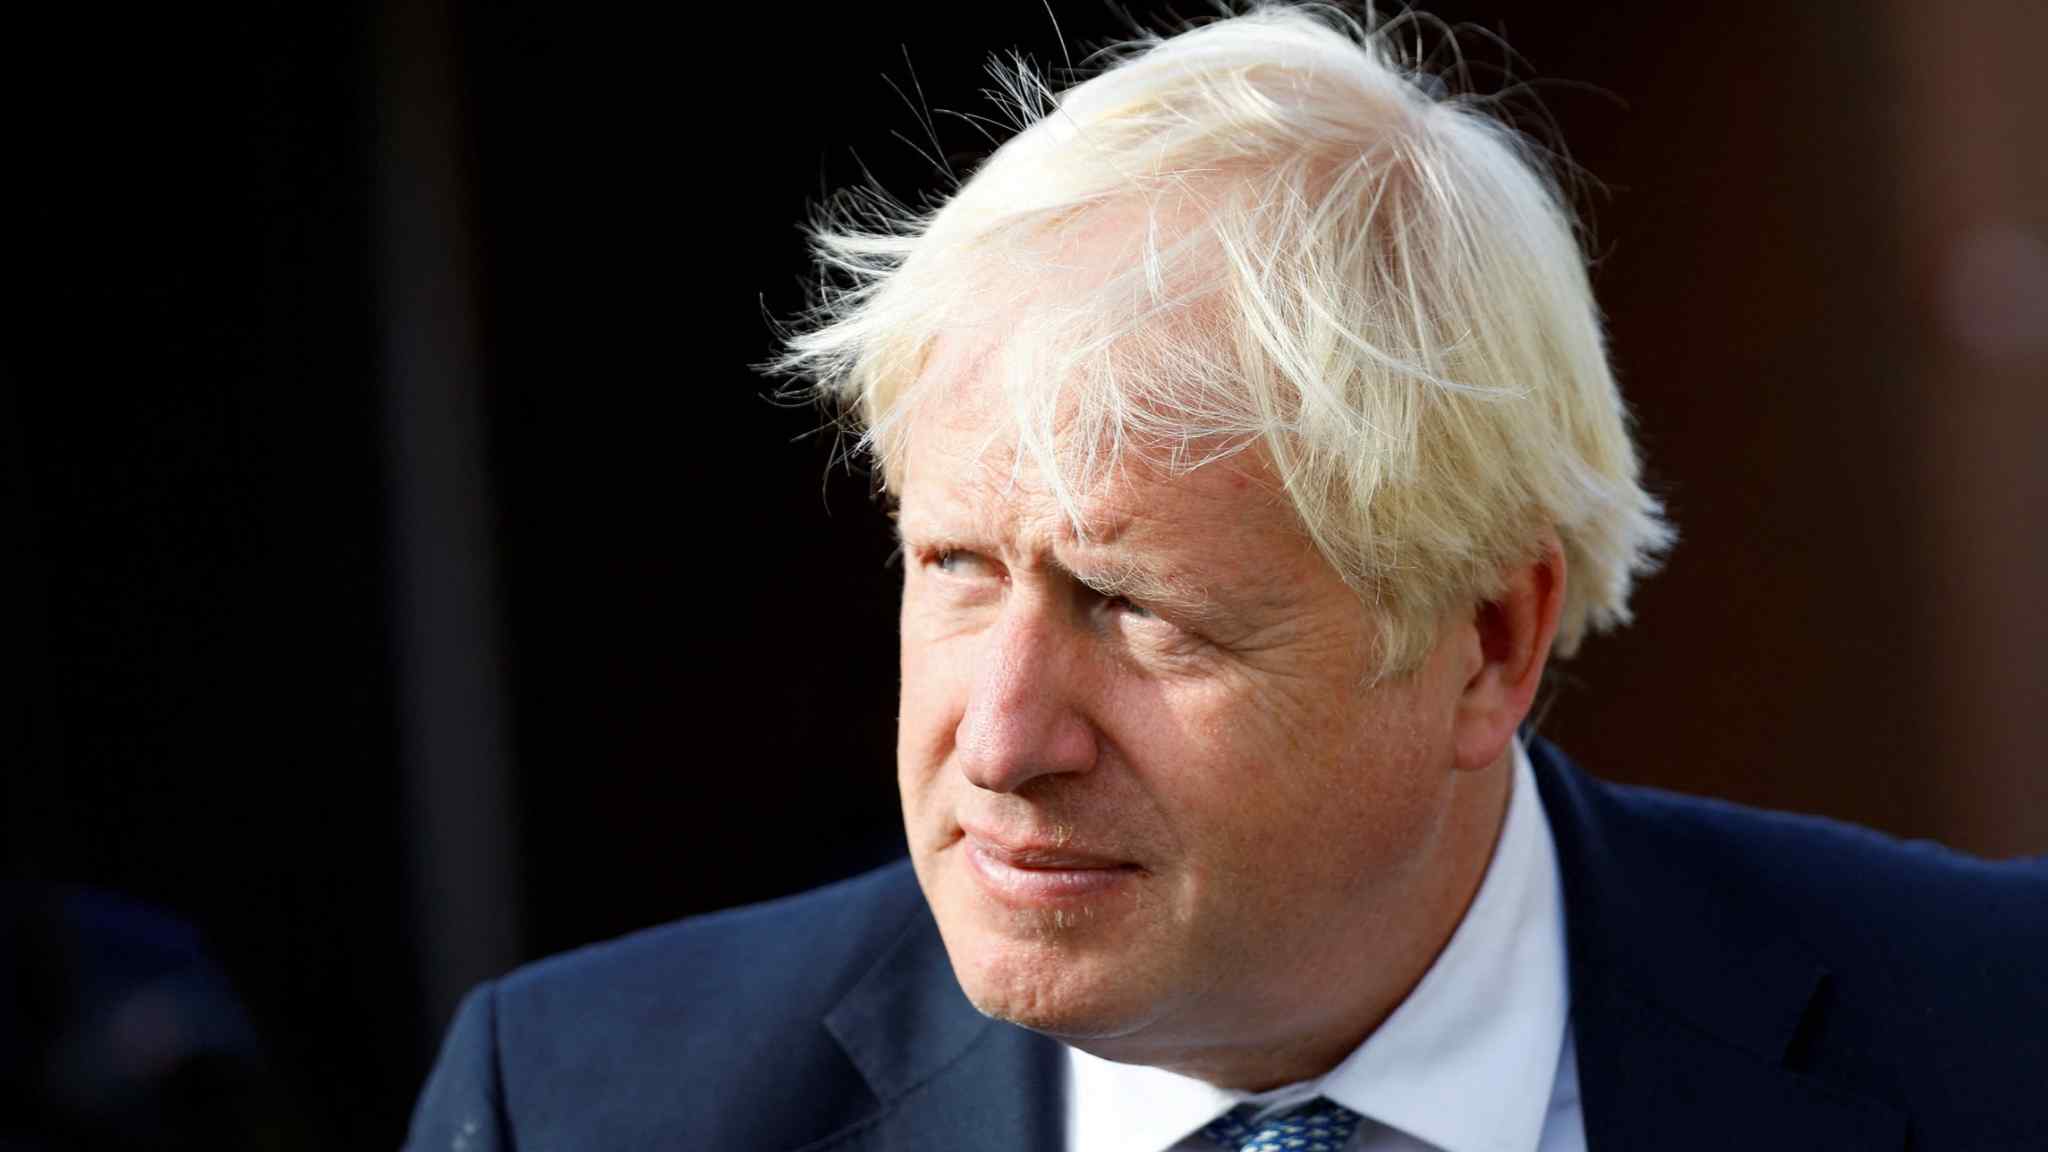 UK government takes legal action over Boris Johnson’s Covid messages